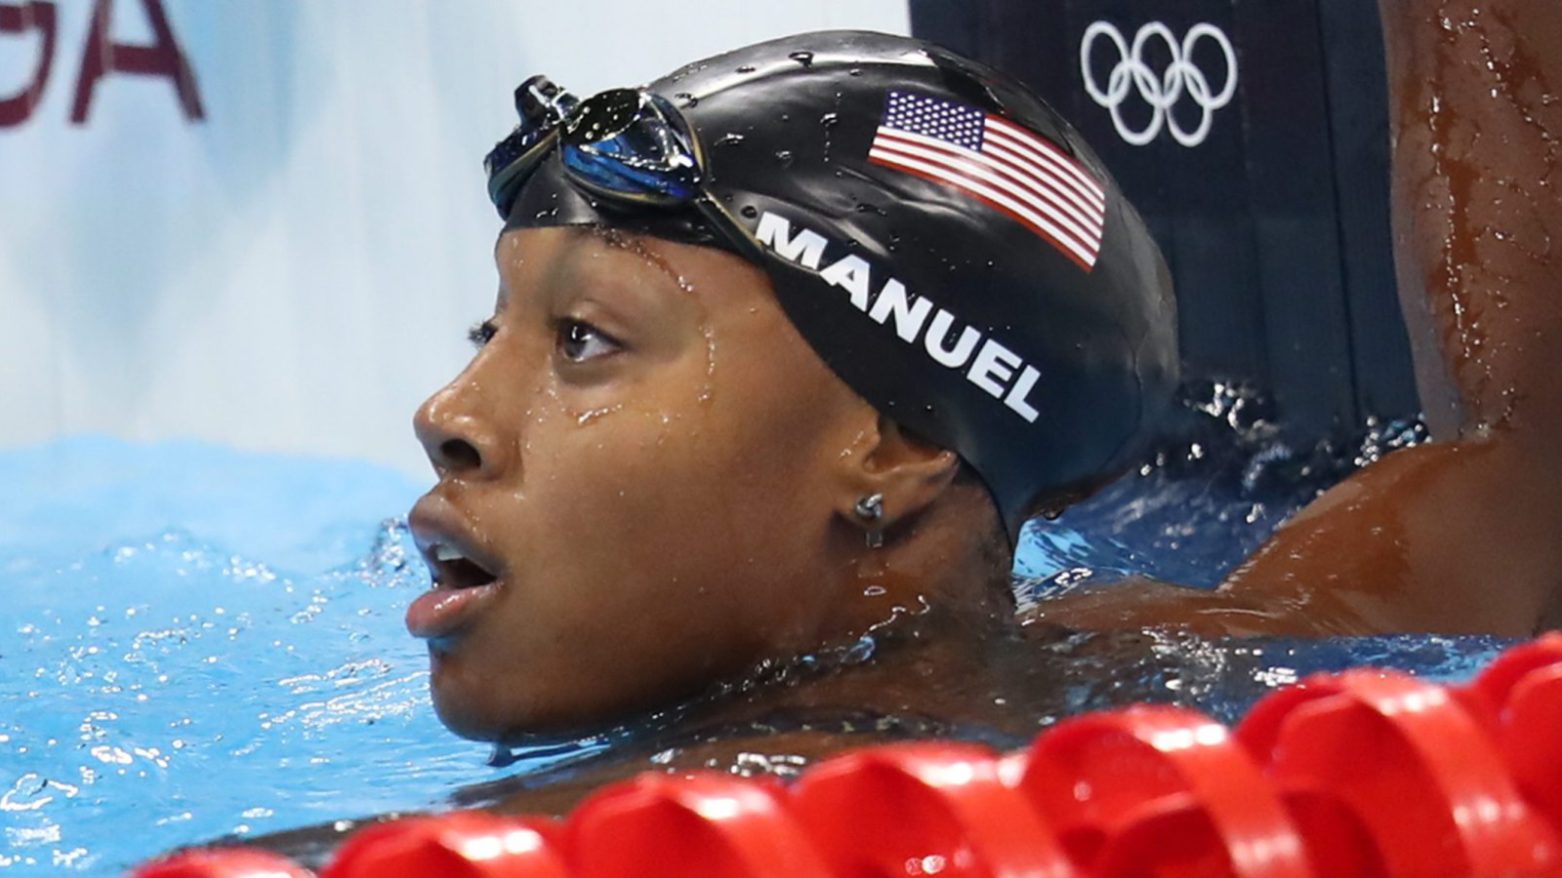 Simone Manuel becomes the first African American female swimmer to win an olympic gold medal